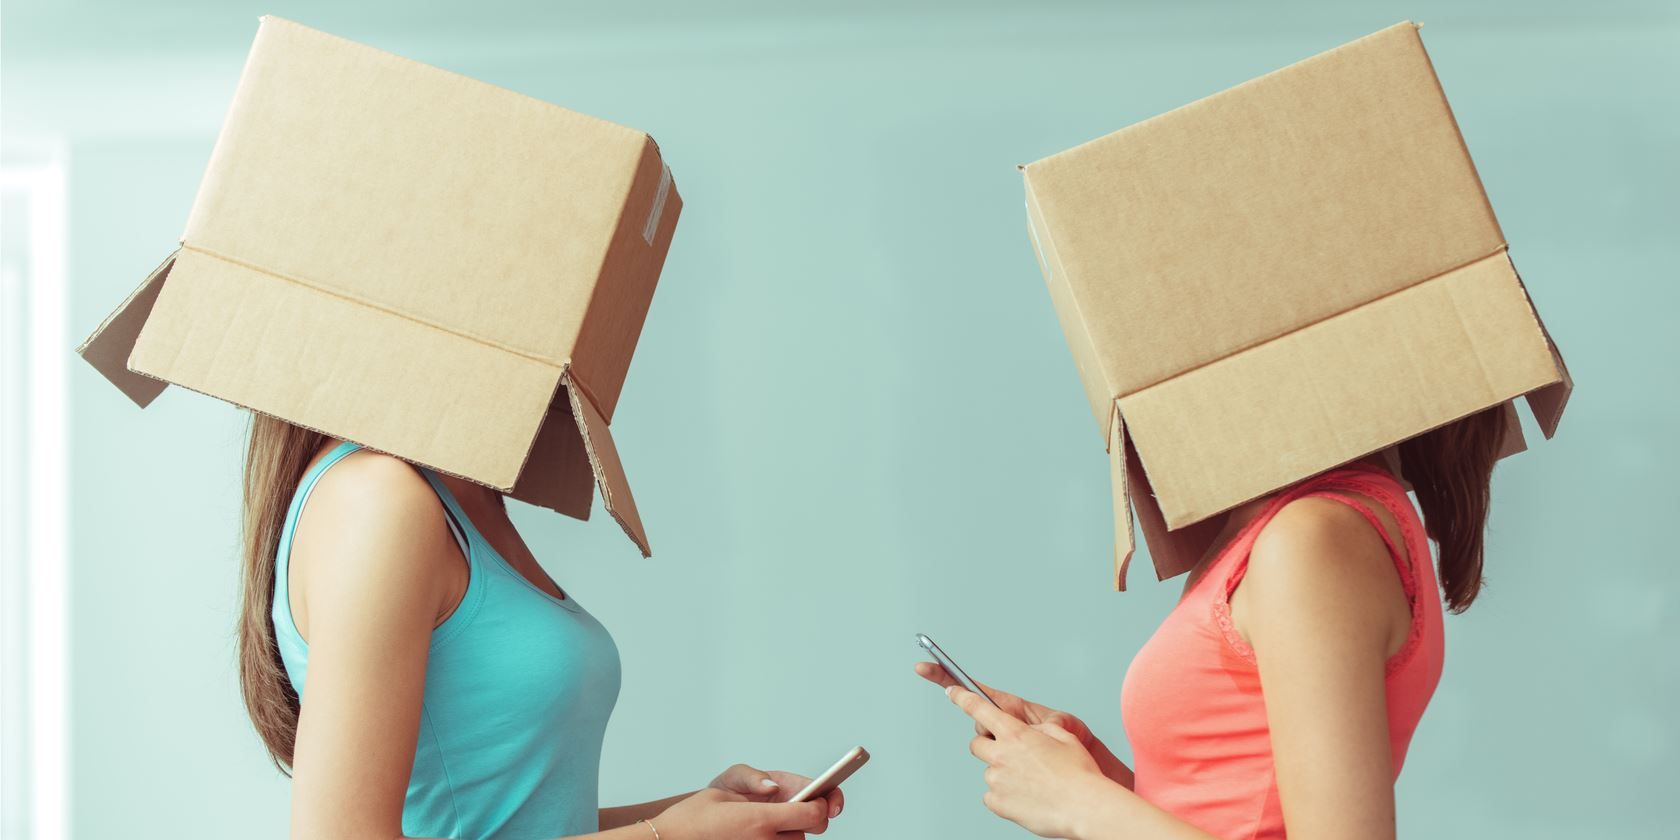 Two women with cardboard boxes on their heads using smartphones 